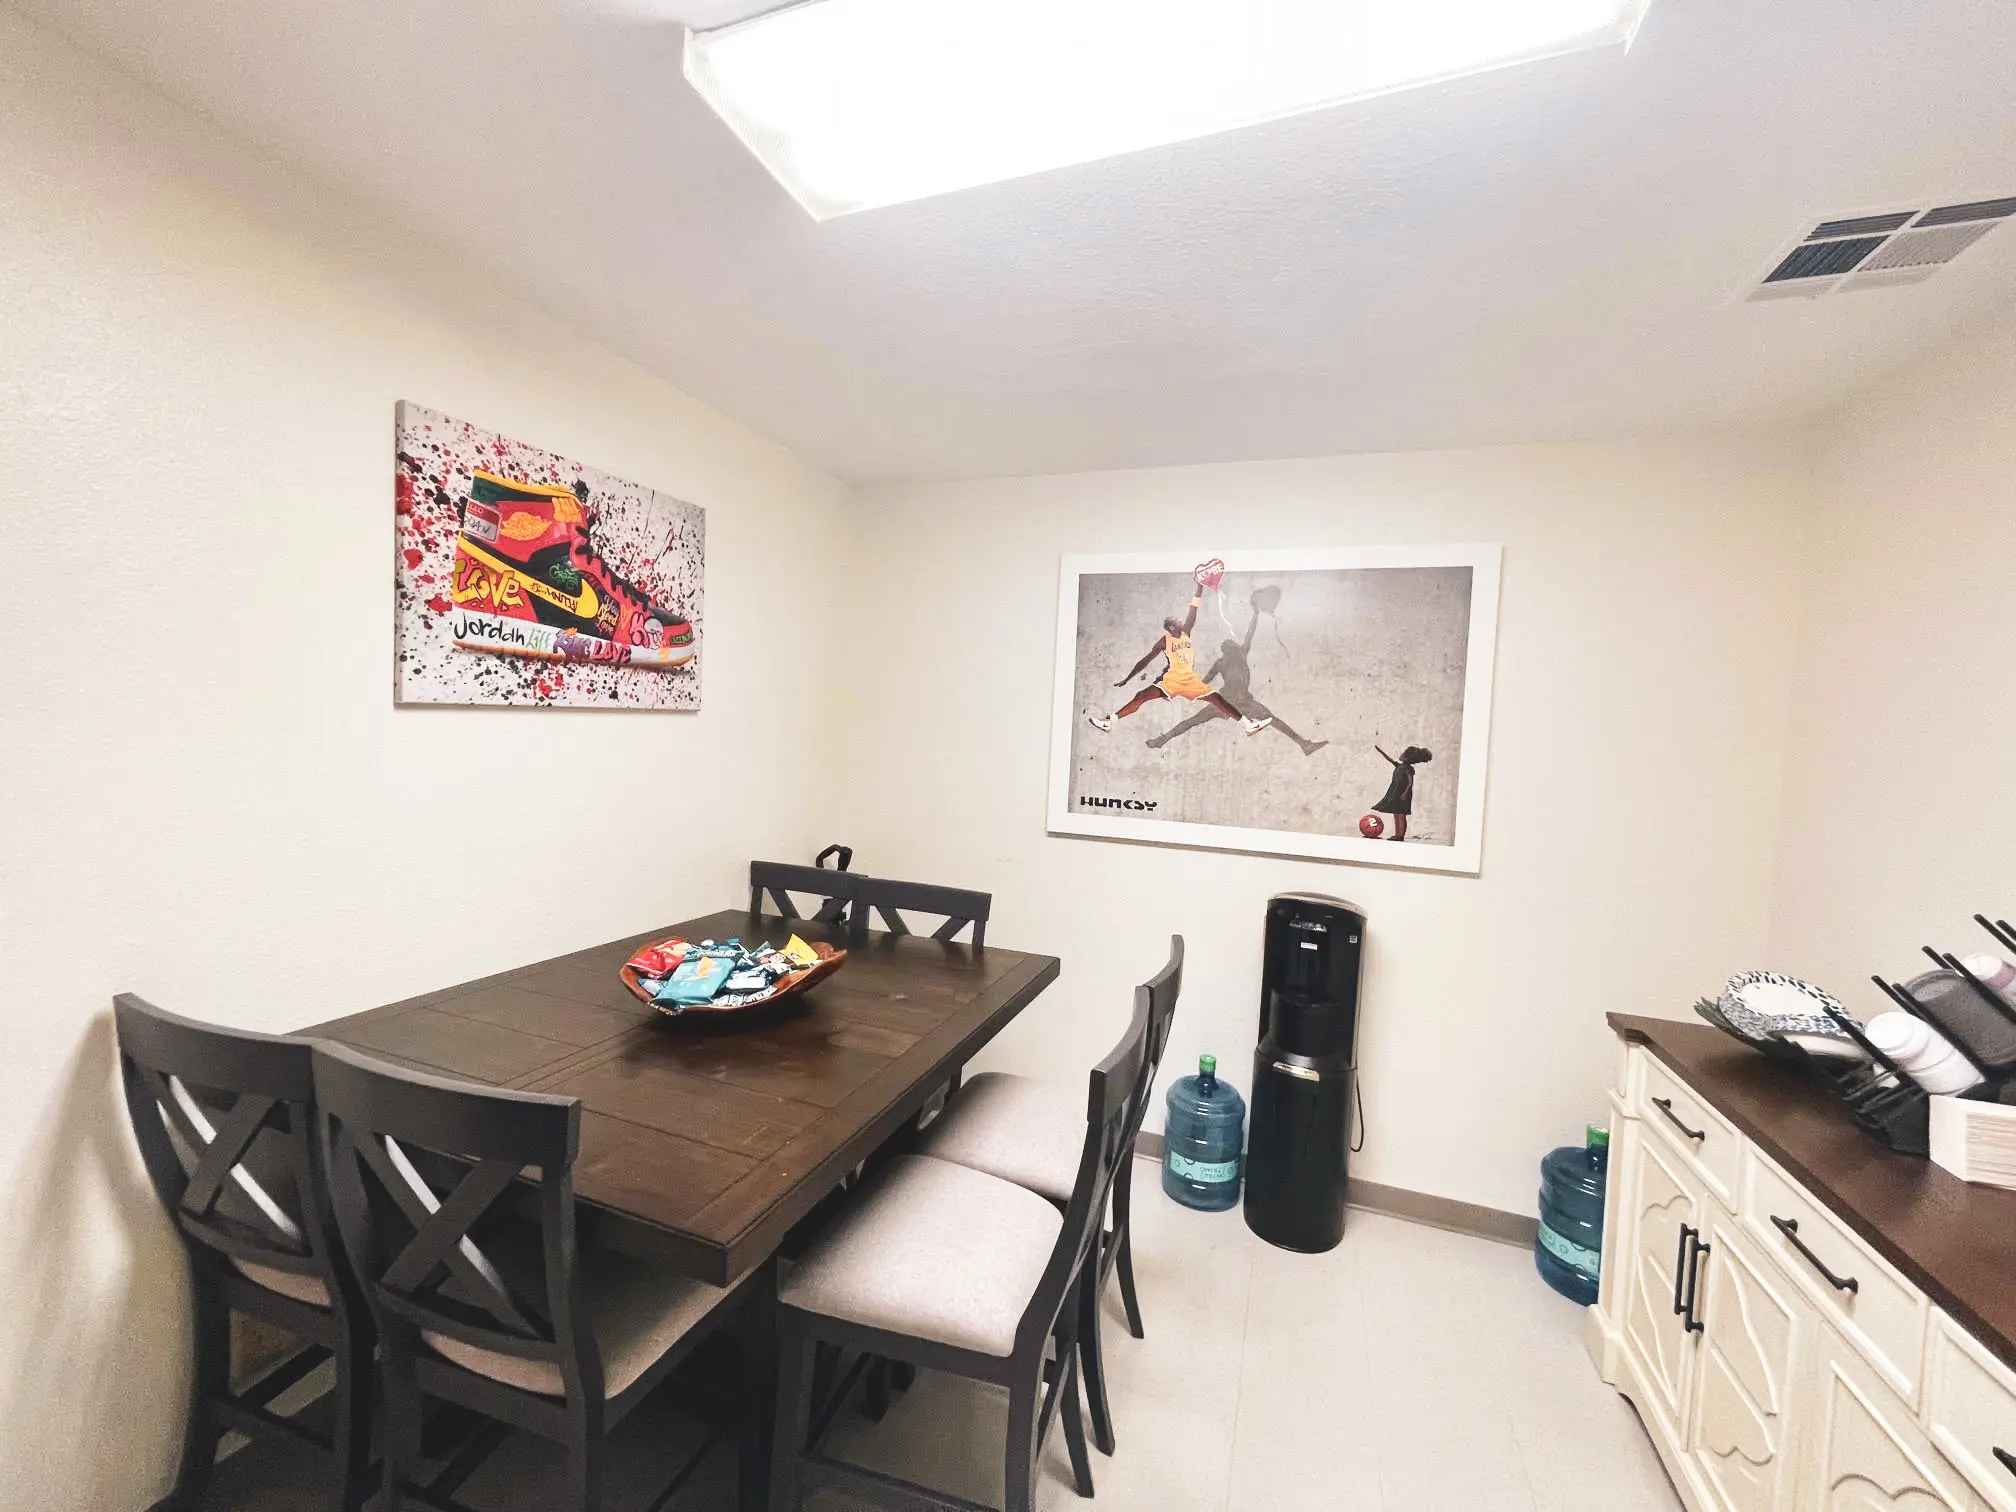 Mental Health Outpatient dining room. There is a dining room table and 3 chairs and a water dispenser. There is artwork hanging on the wall.